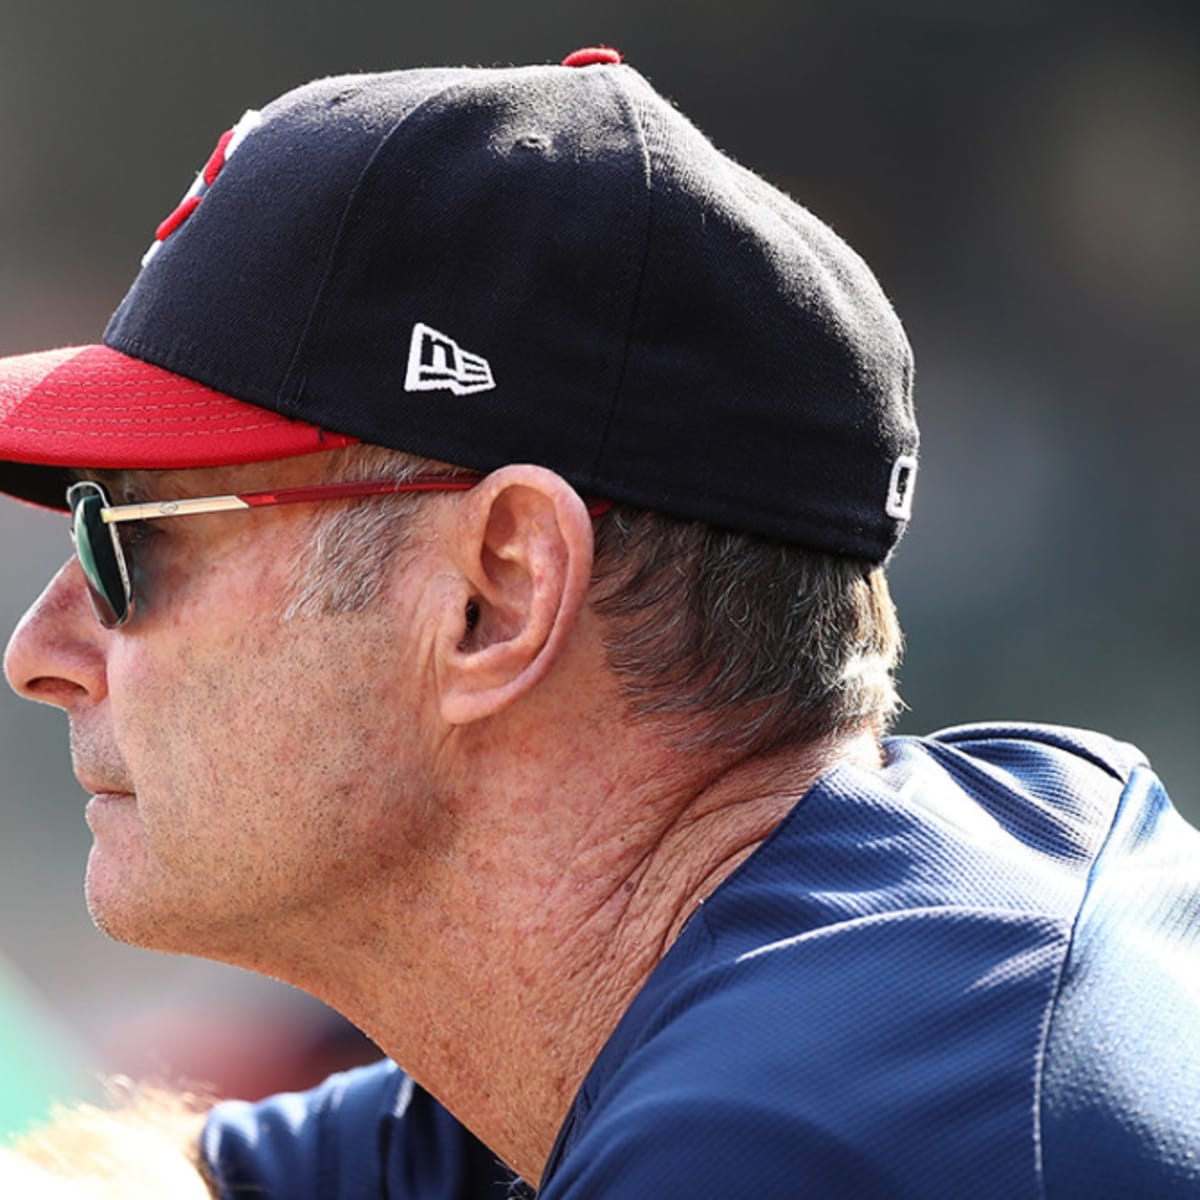 The reason why the Minnesota Twins fired Paul Molitor was revealed